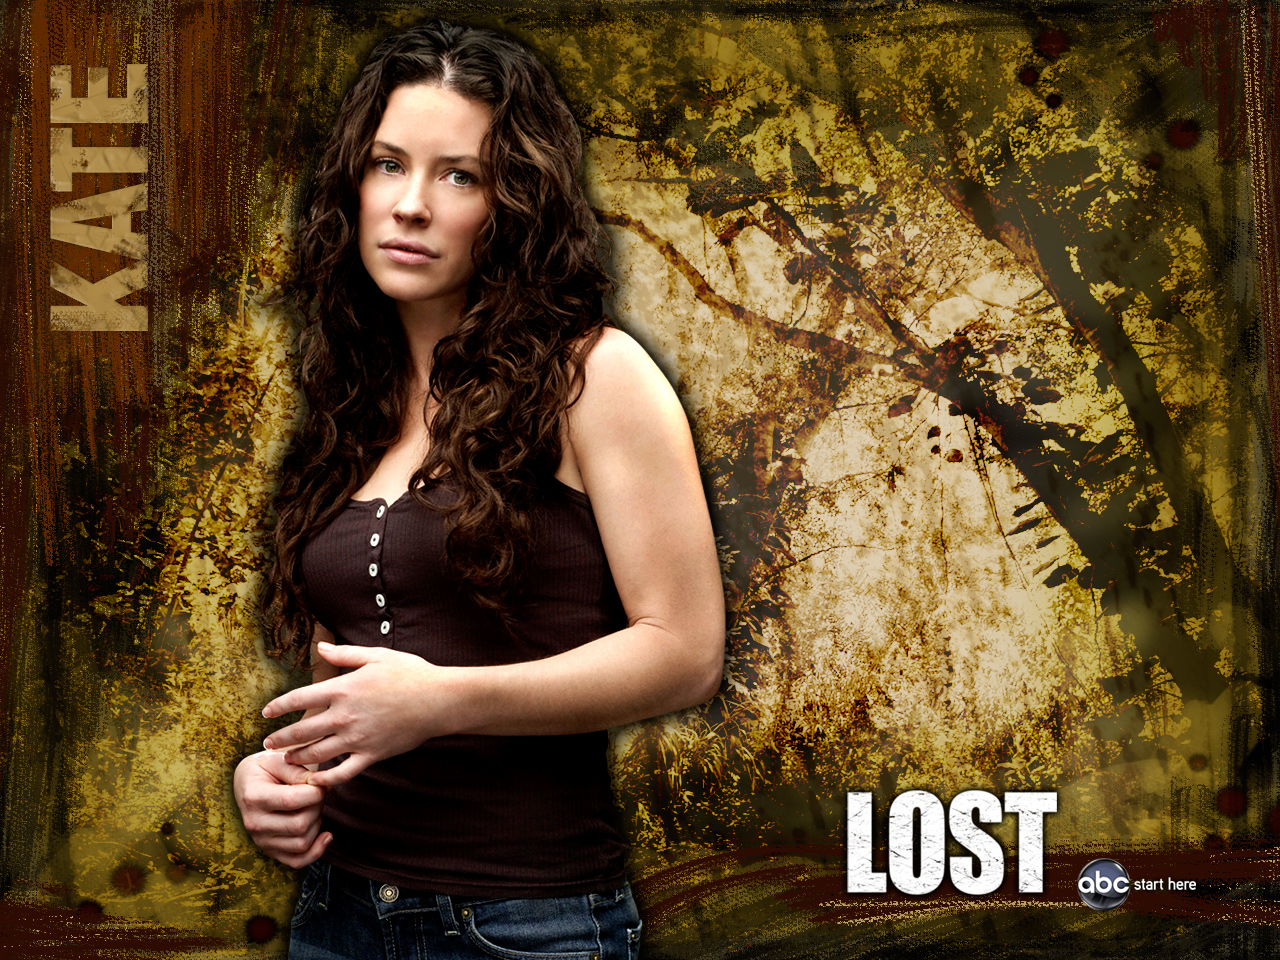 tv show, lost (tv show), lost